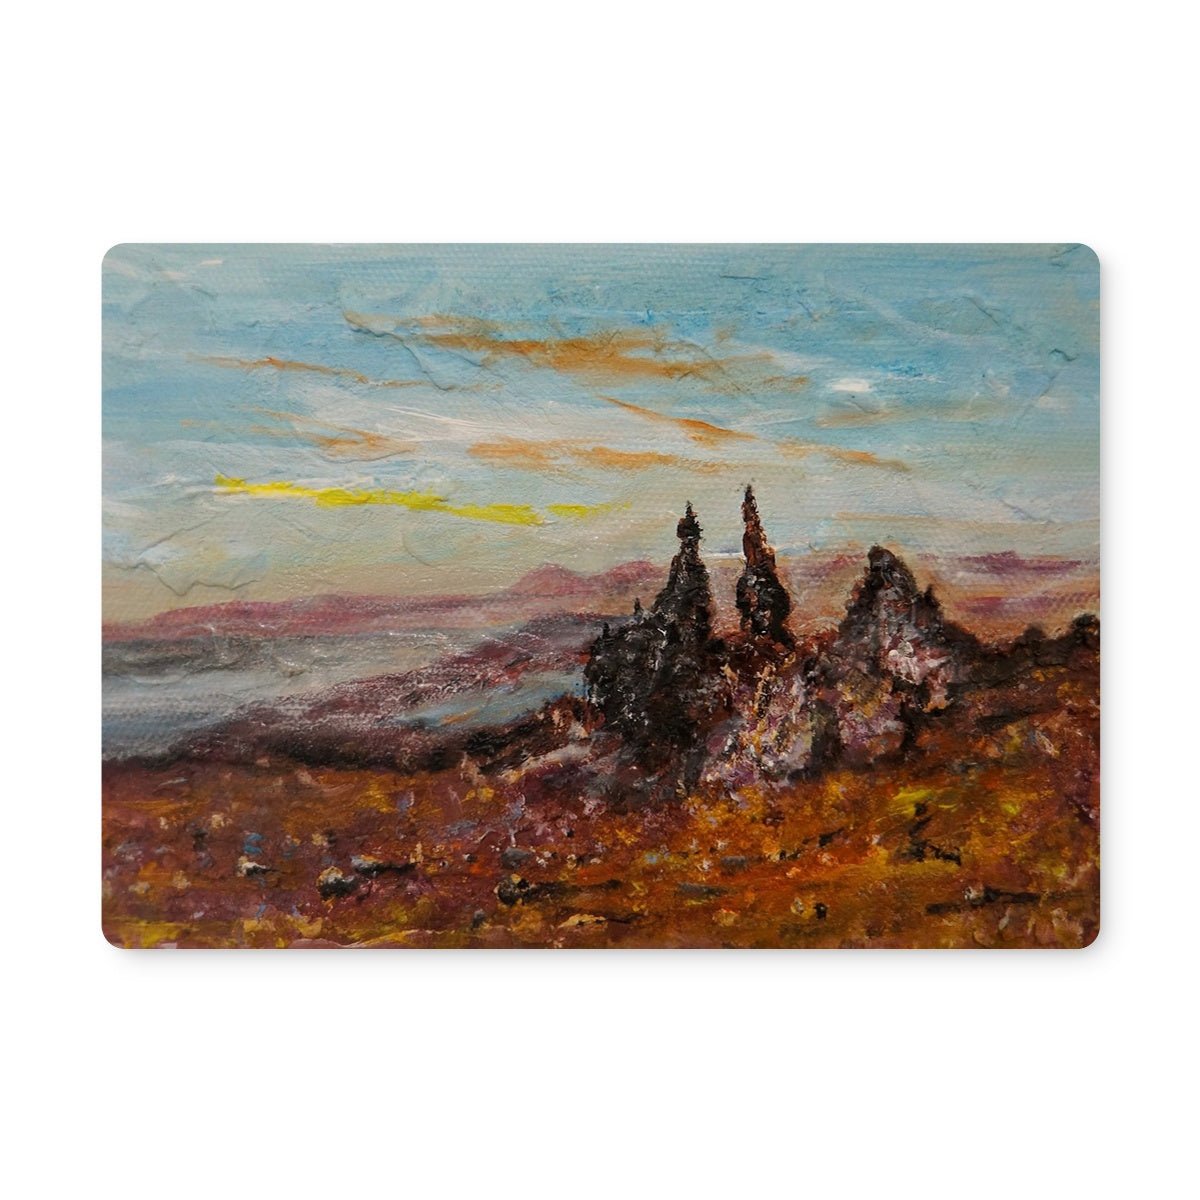 The Old Man Of Storr Skye Art Gifts Placemat-Placemats-Skye Art Gallery-6 Placemats-Paintings, Prints, Homeware, Art Gifts From Scotland By Scottish Artist Kevin Hunter